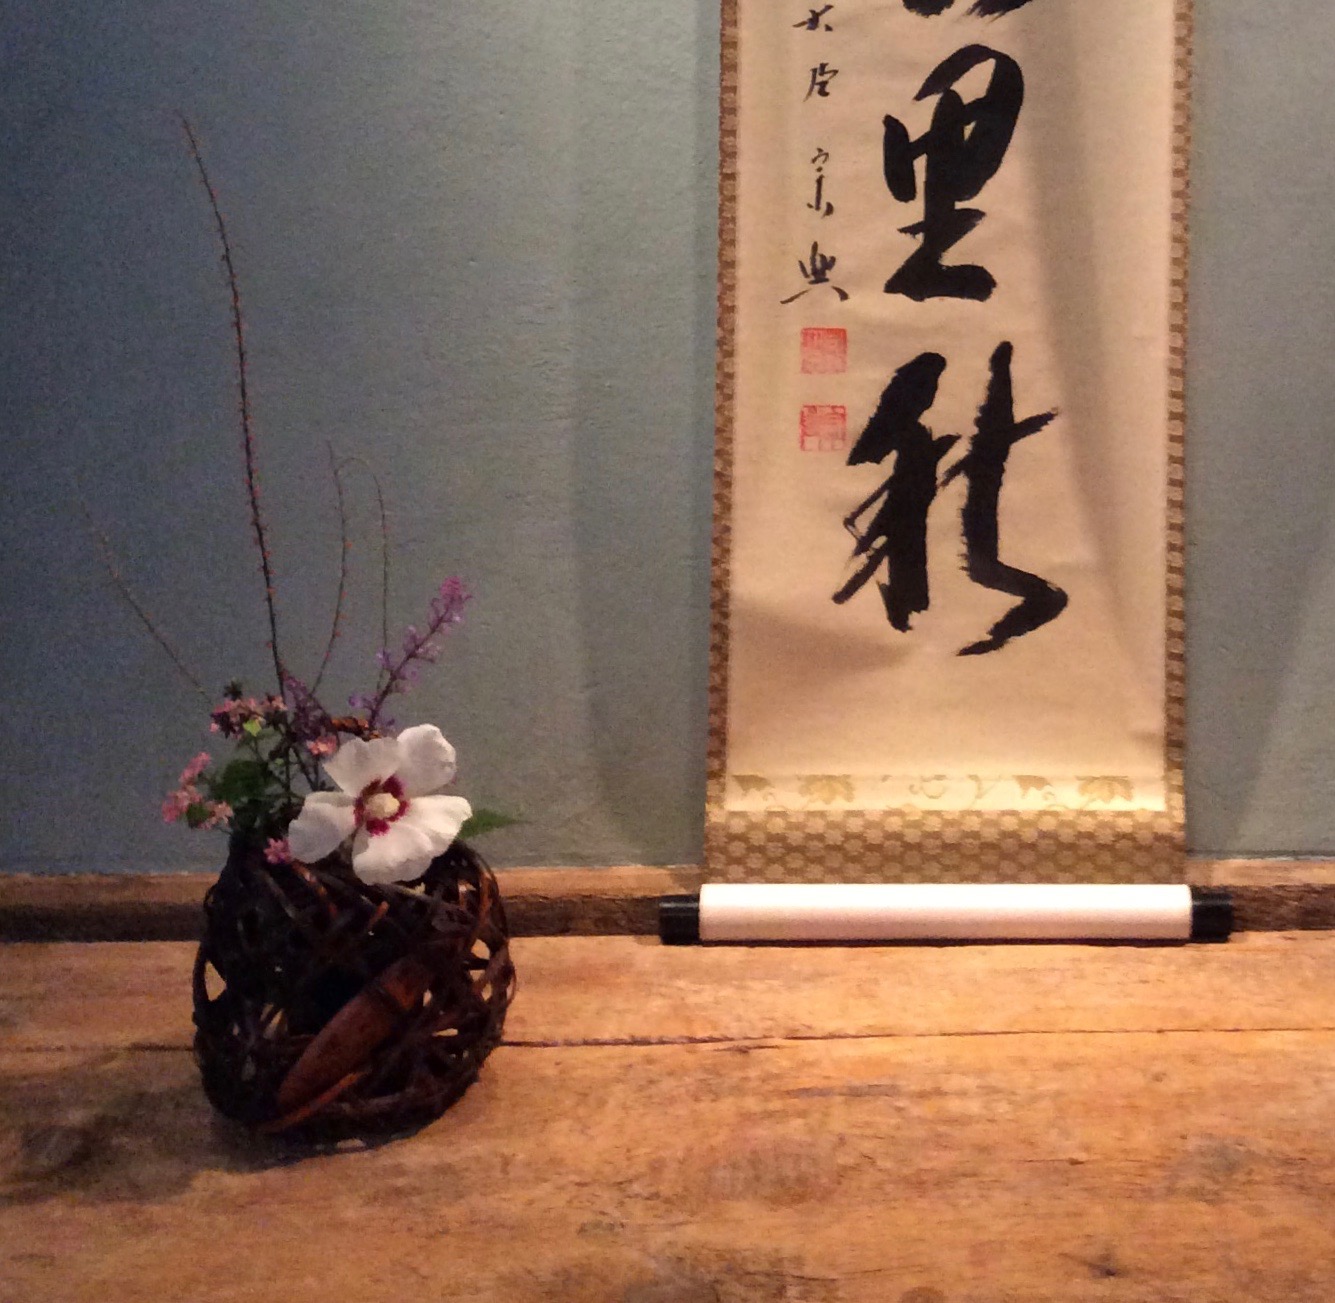 A flower is arranged for the tea ceremony.